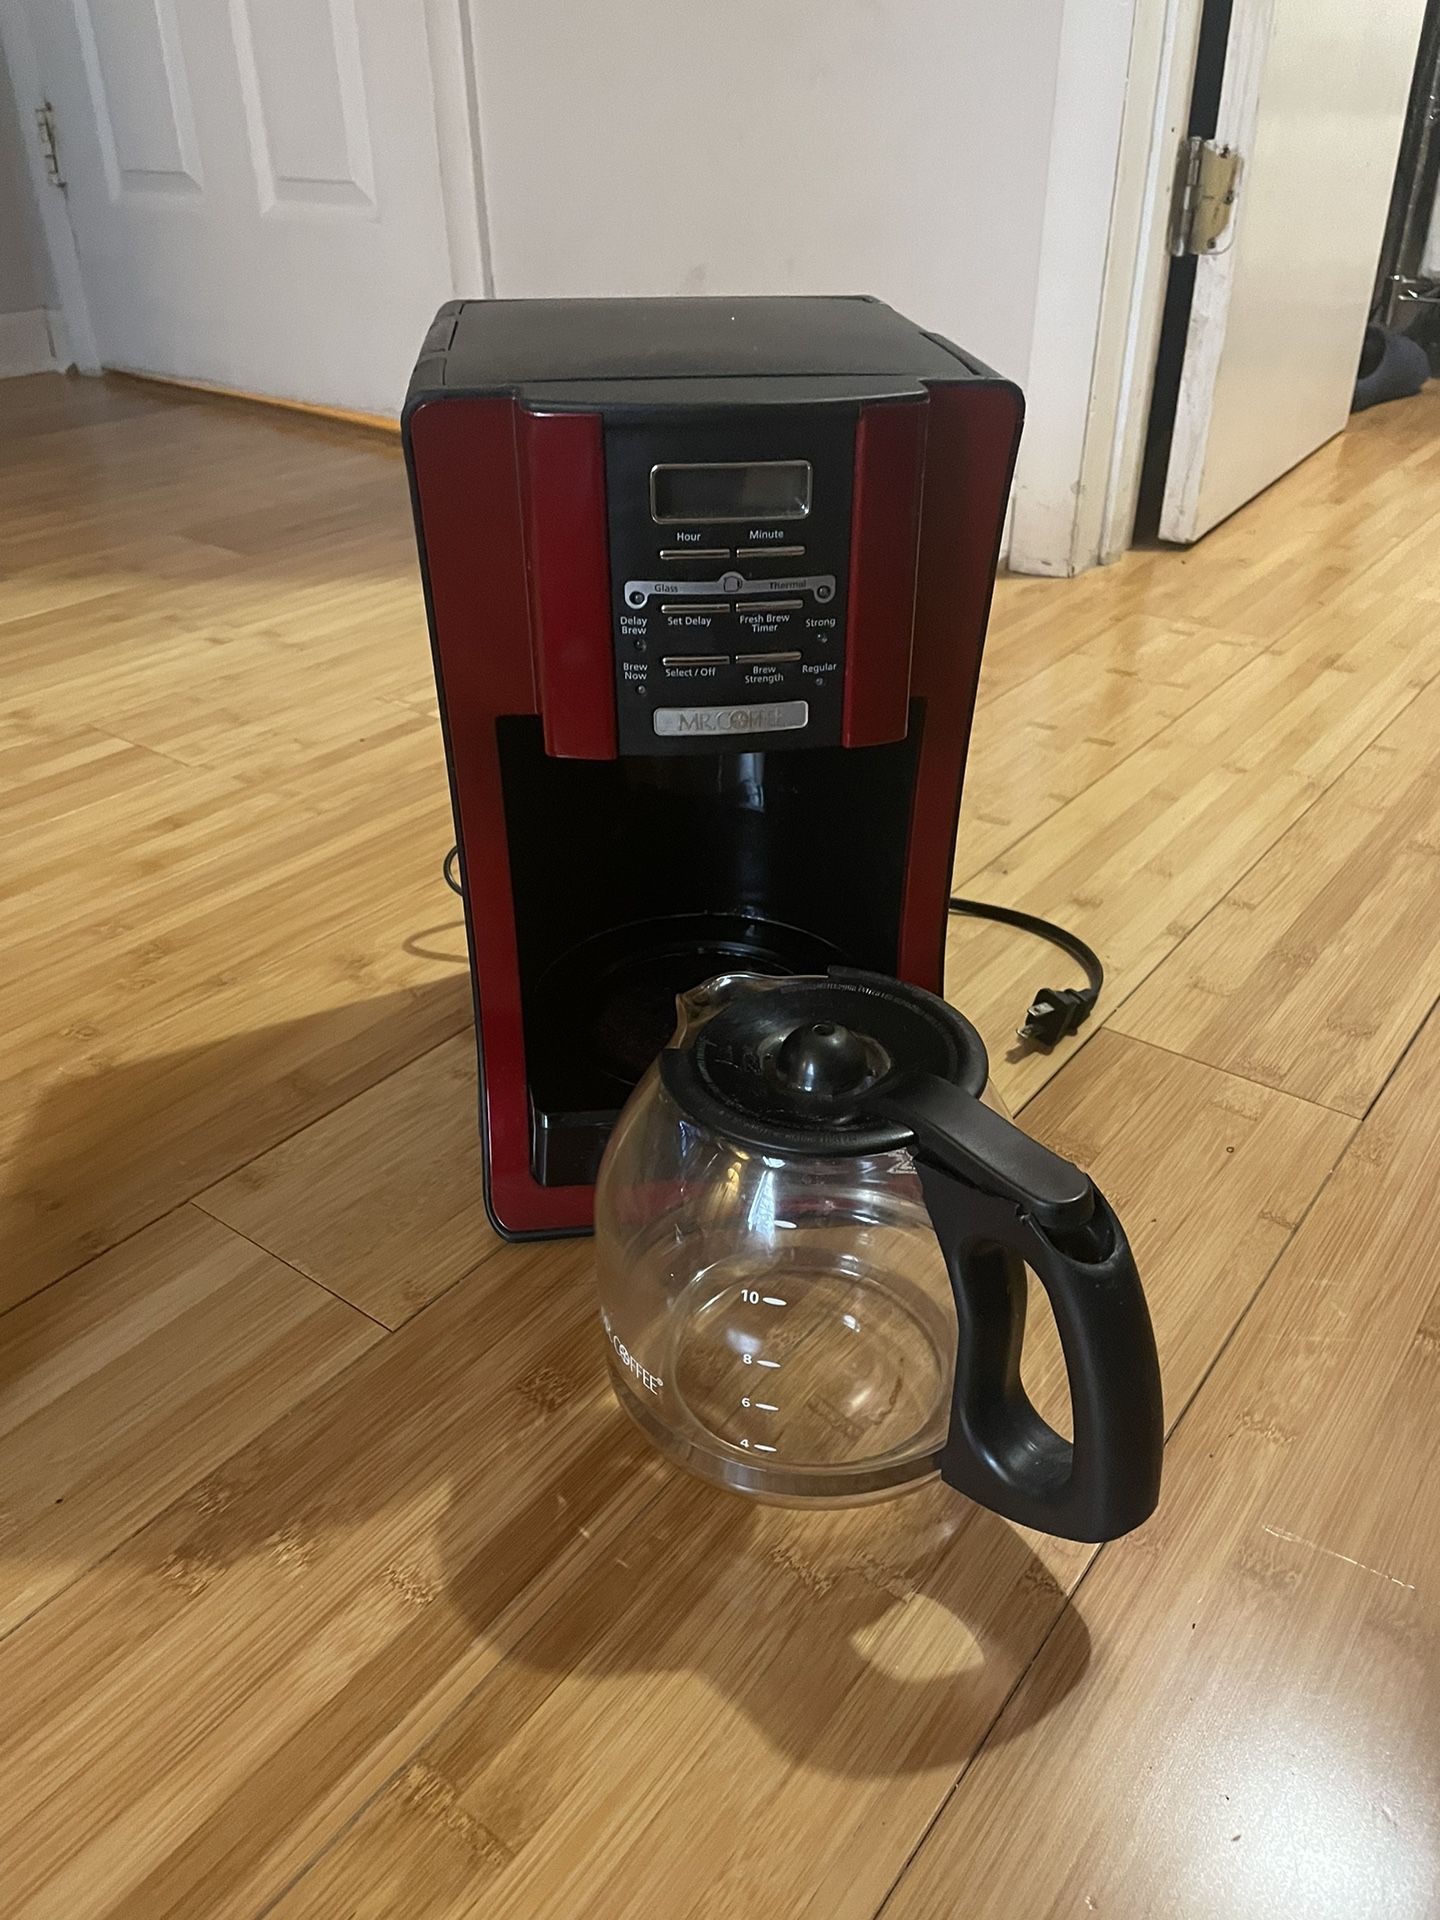 Mr. Coffee 12 Cup Rrd Automatic Drip Coffee Maker for Sale in Jackson  Township, NJ - OfferUp